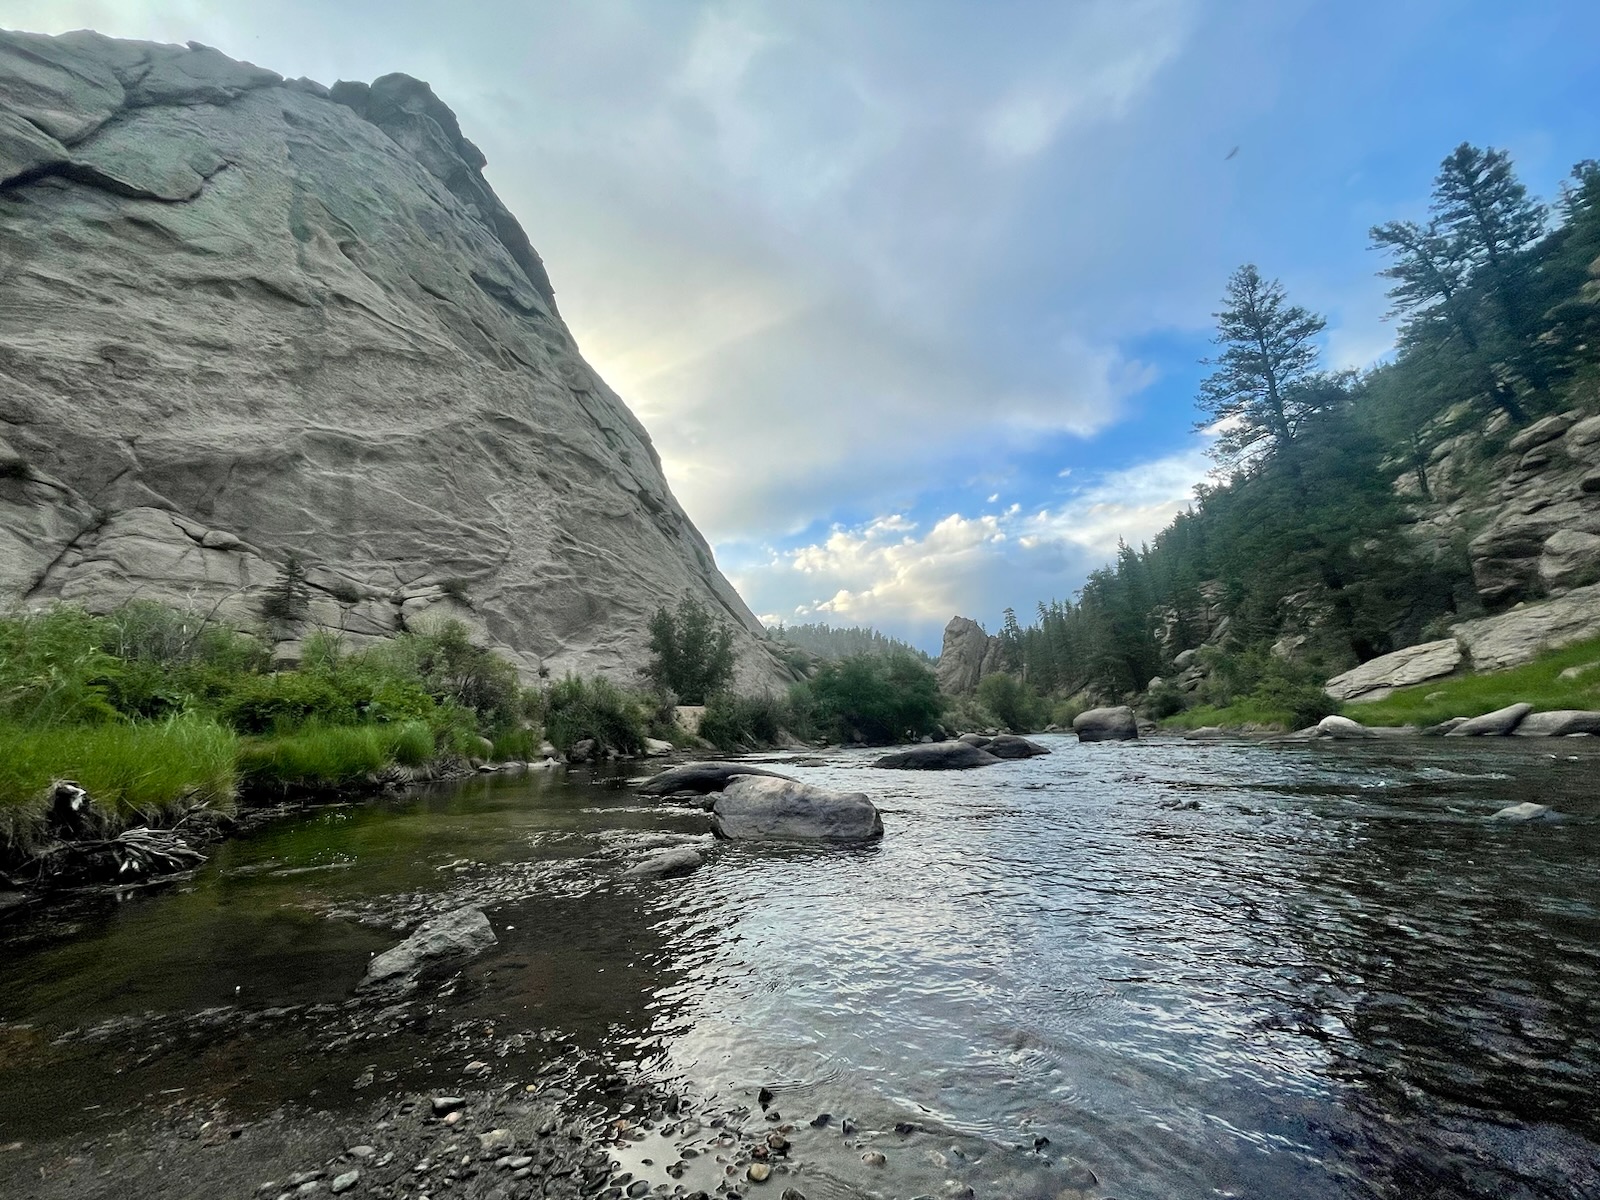 Image of Elevenmile. A rock wall is on the left and a river is to the front and right, lined with boulders and trees on the far right.